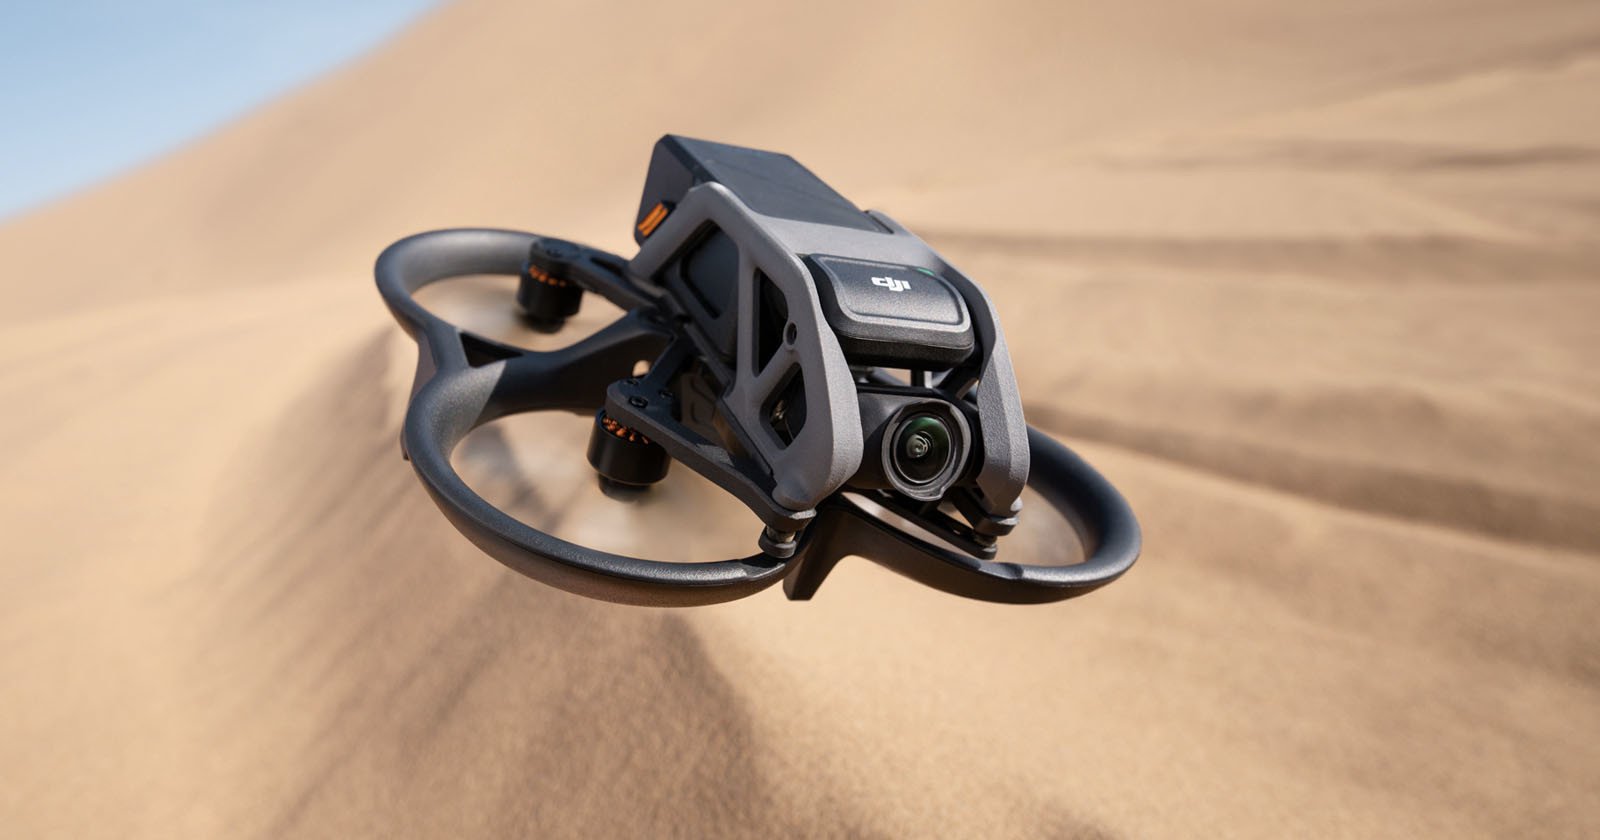 The DJI Avata is a Compact FPV Drone Designed for Everyone